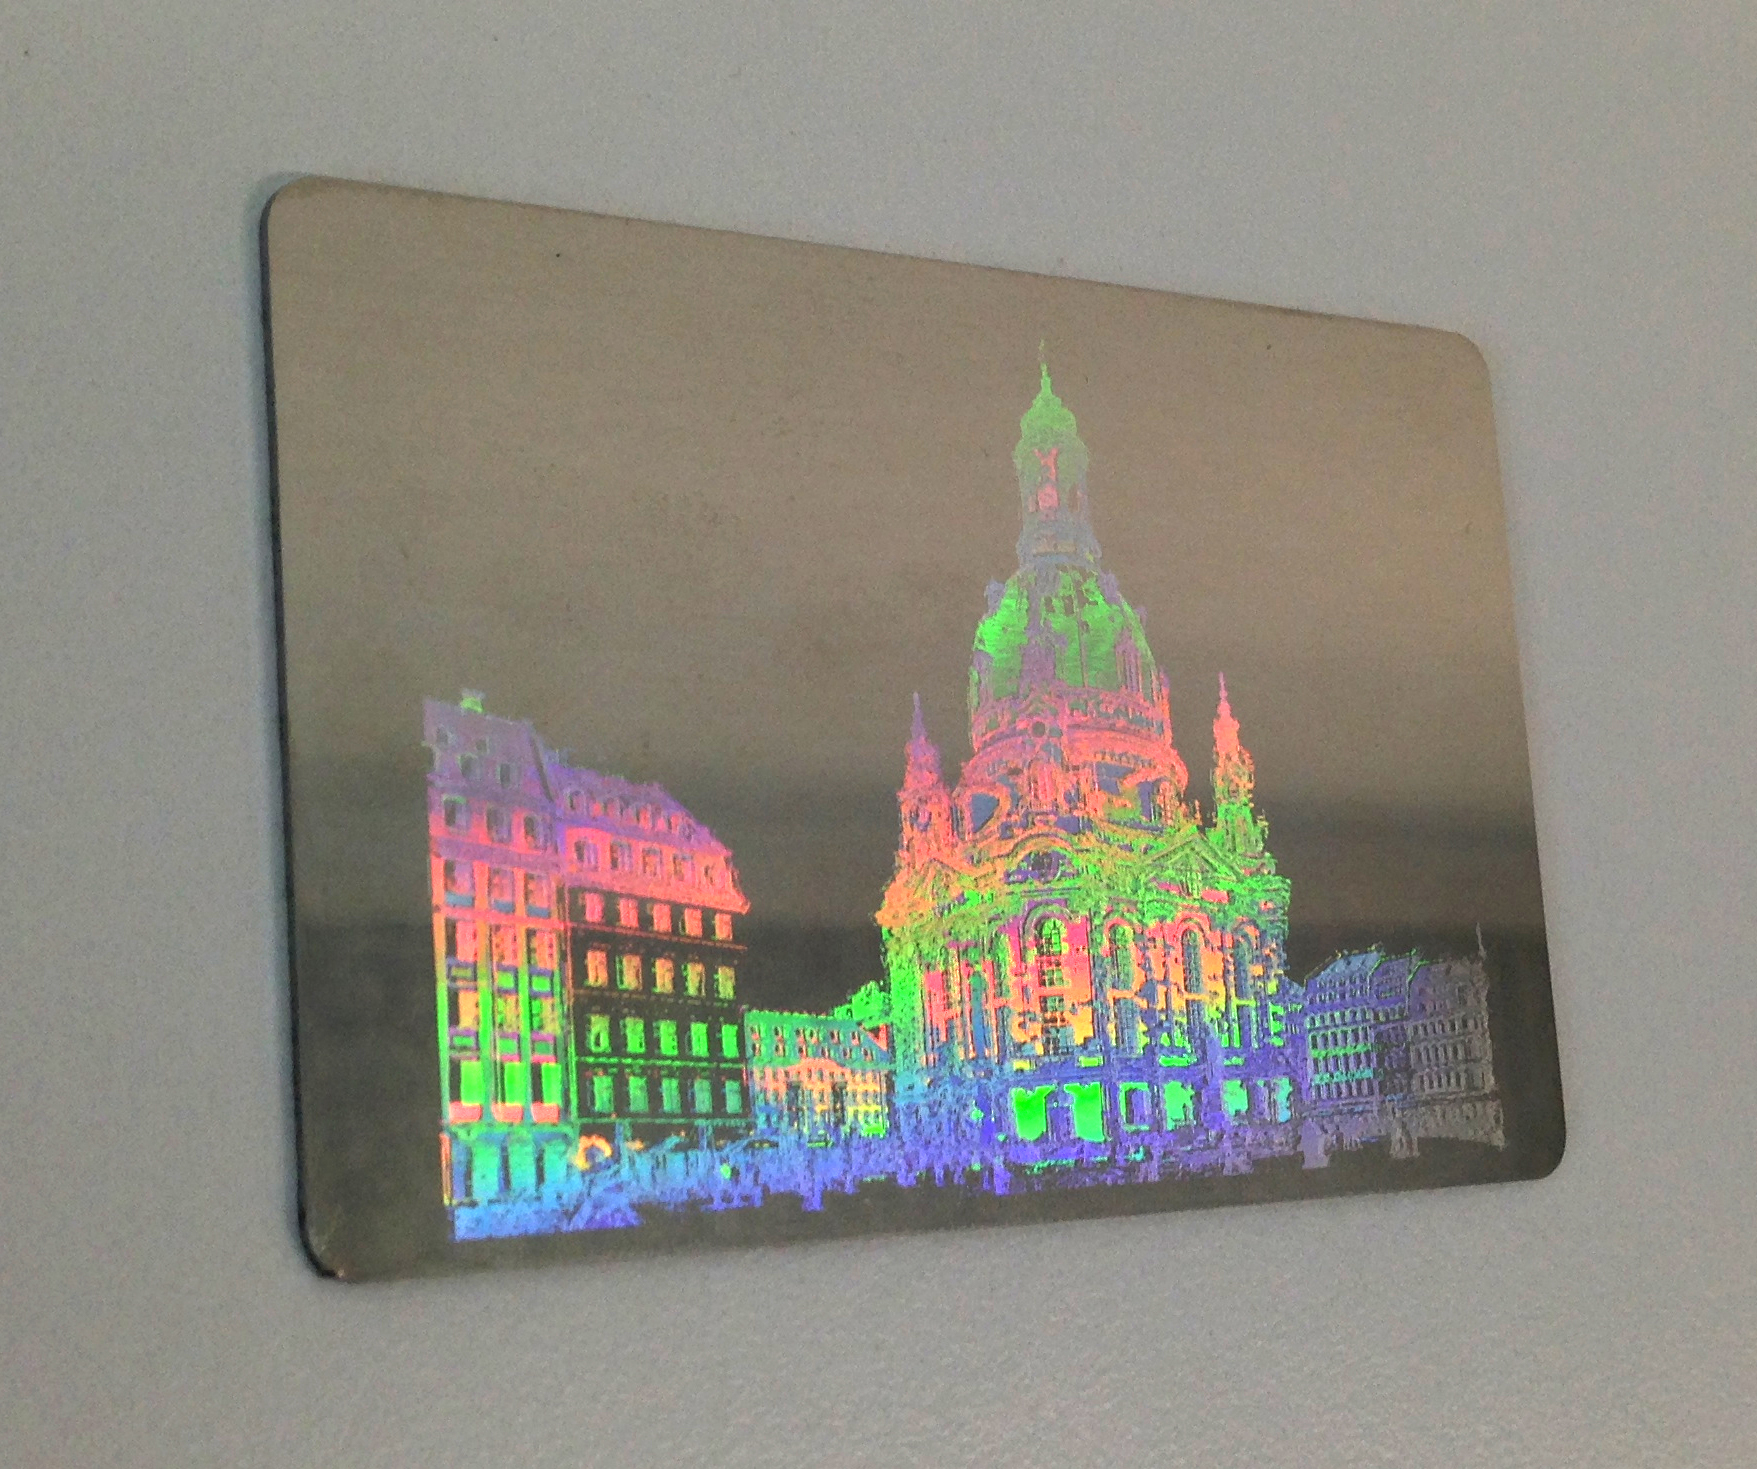 DLIP structured decorative element (Dresden Church of our Lady) on stainless steel